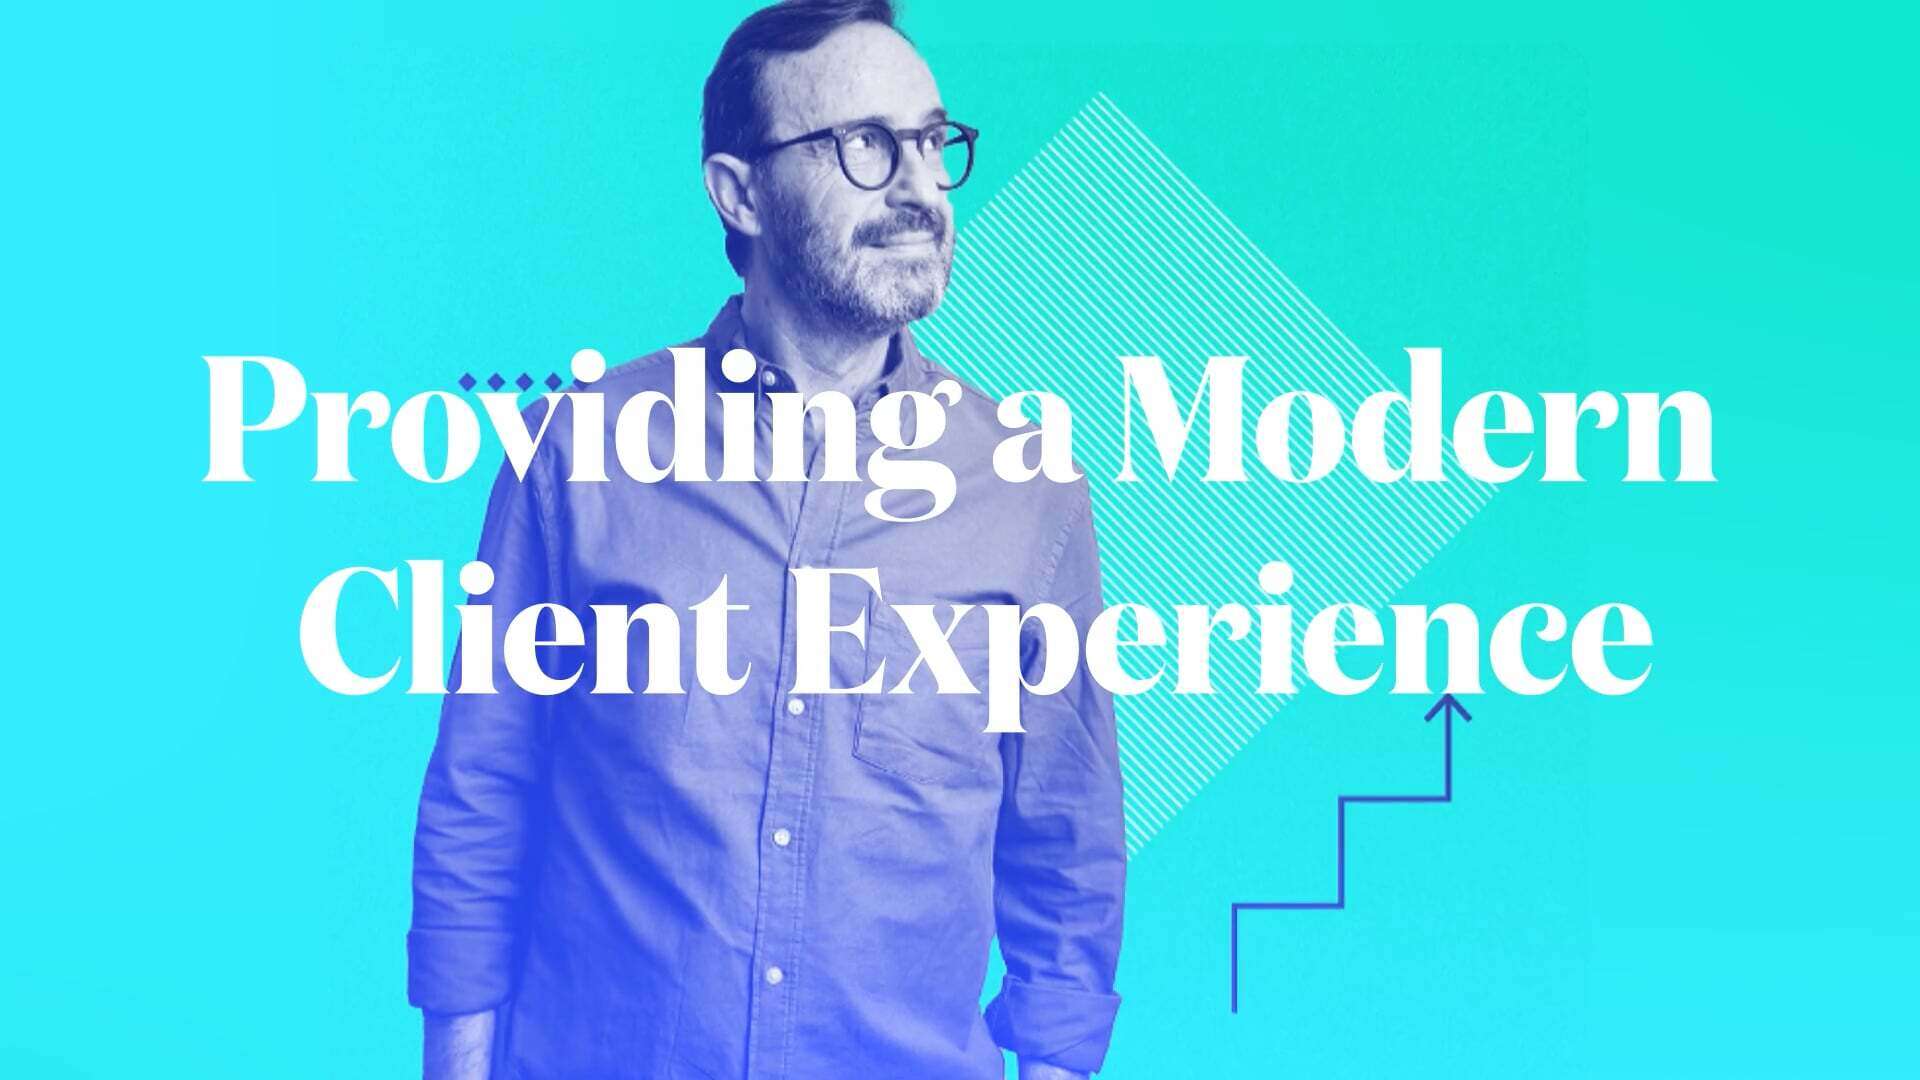 Providing a Modern Client Experience